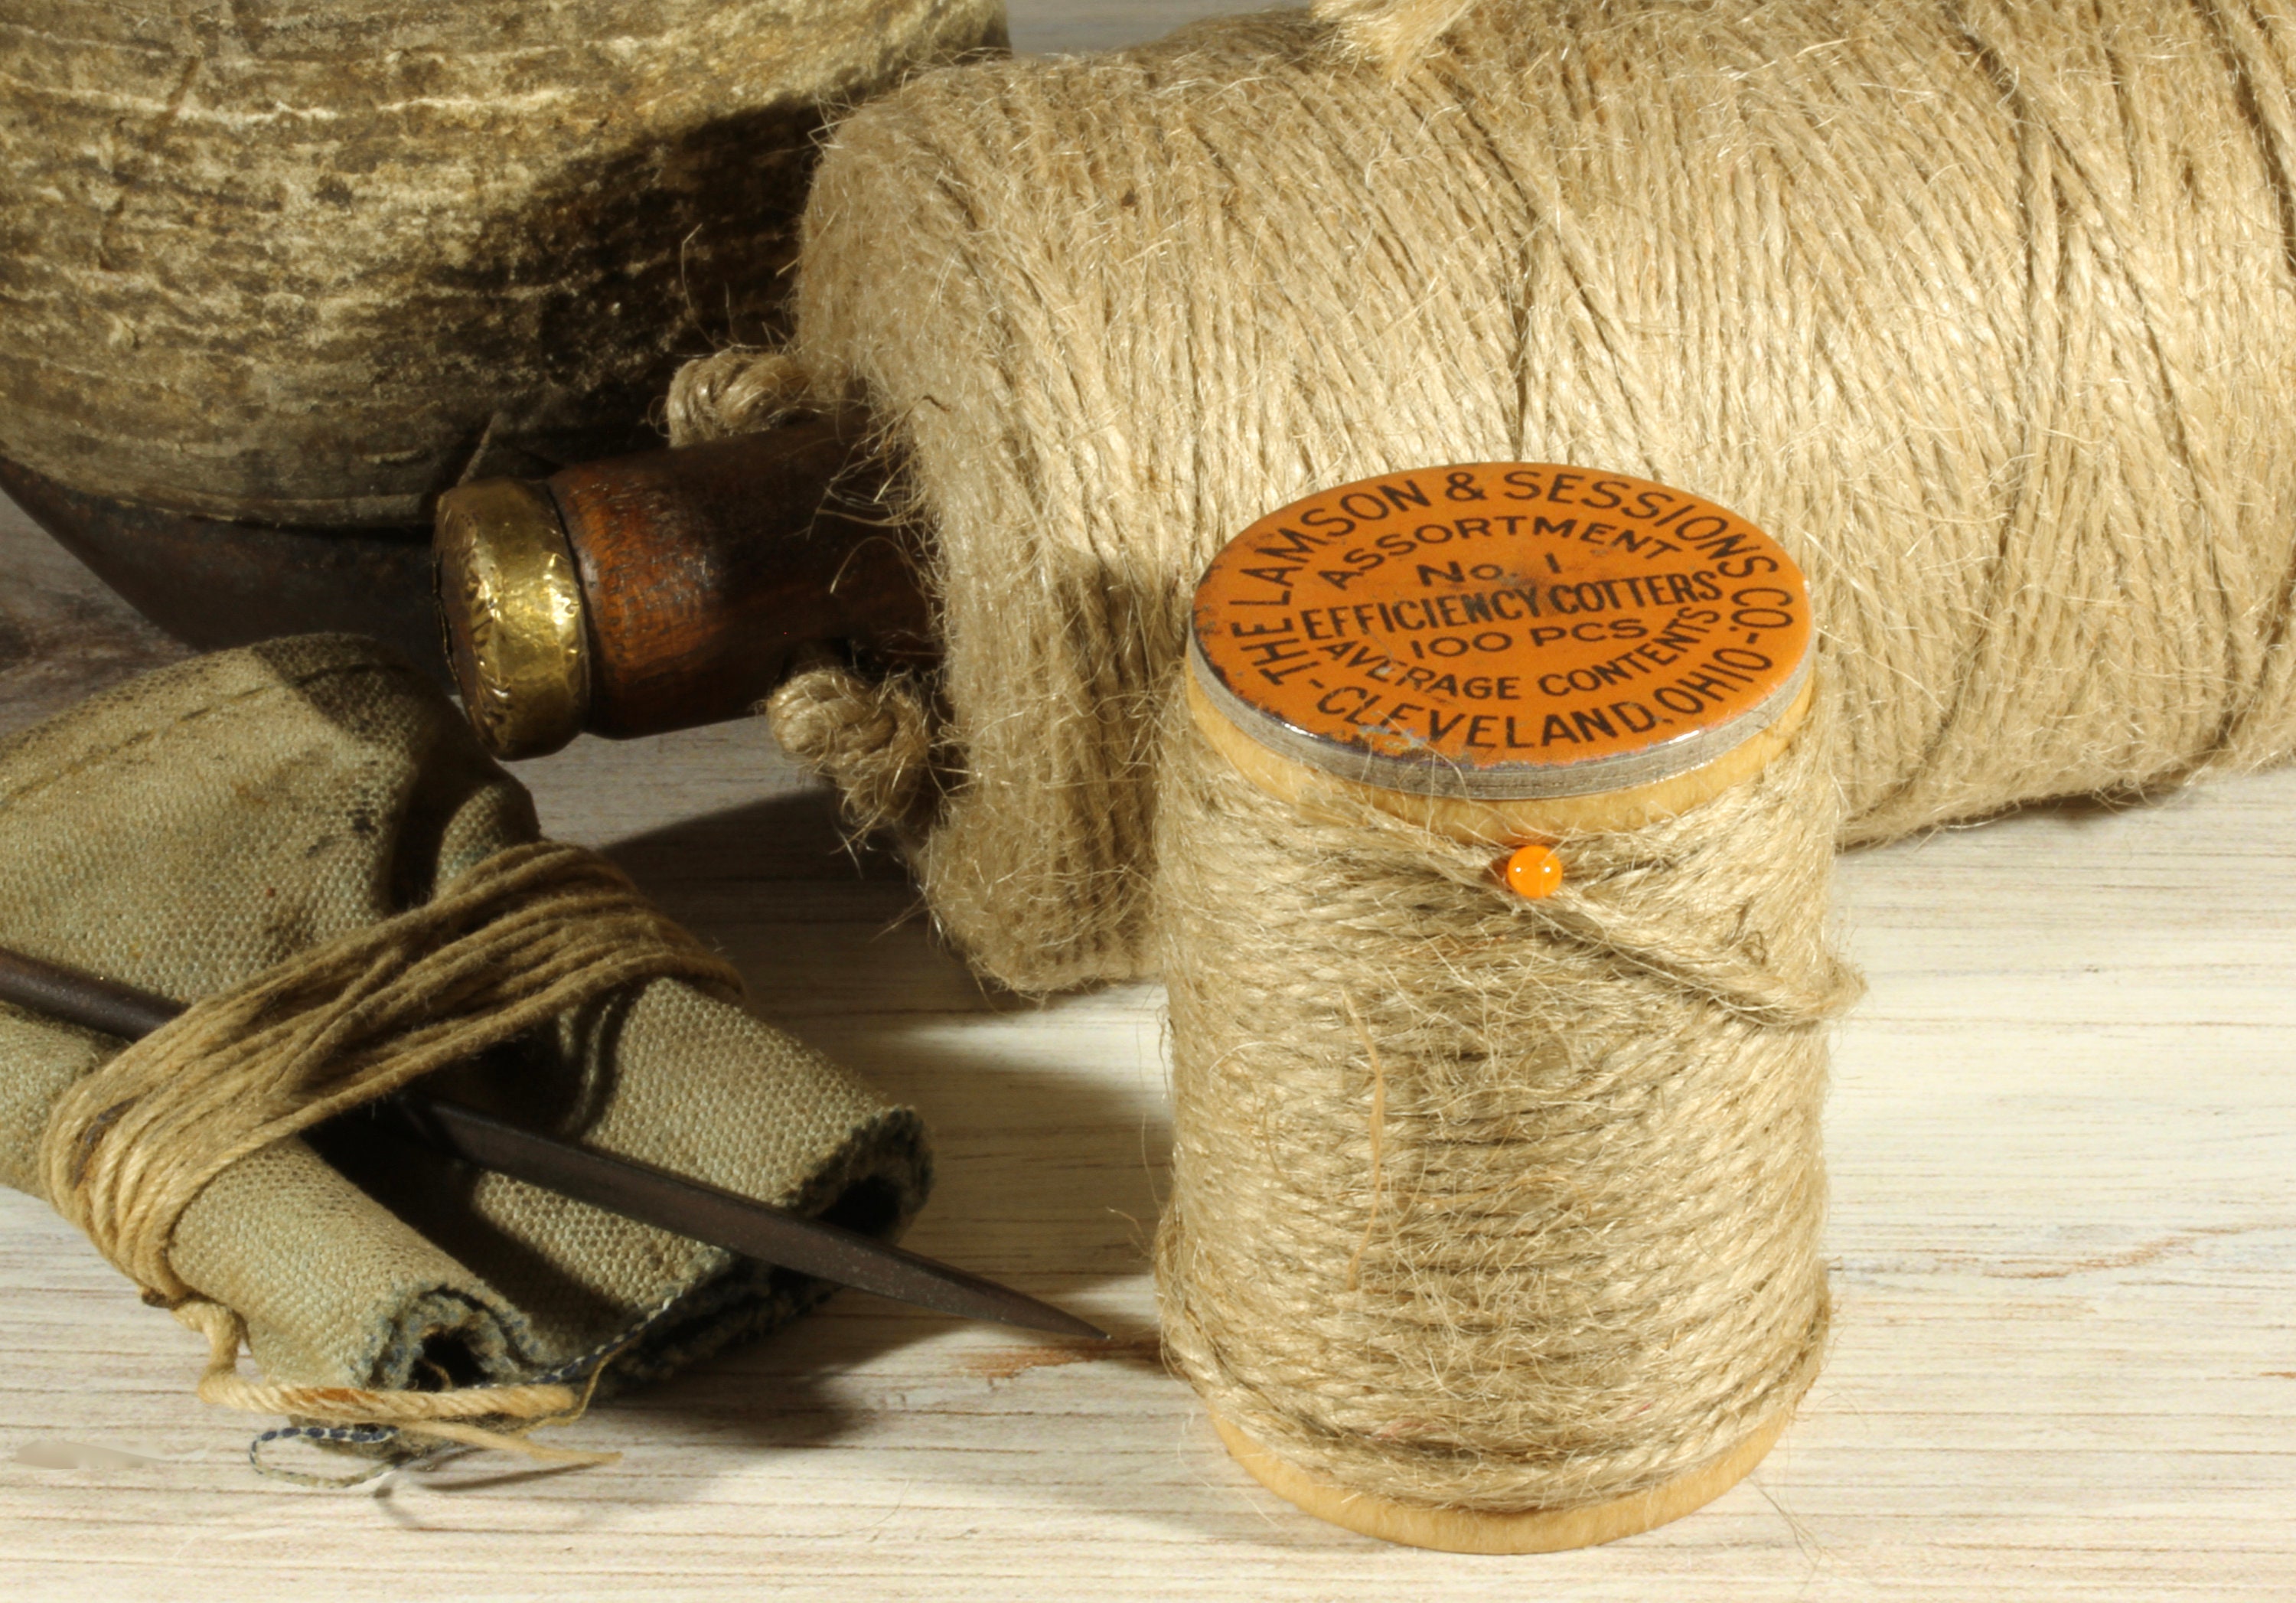 Twine Jute String for Craft Heavy Duty Natural Gift Wrapping Parcel Garden  